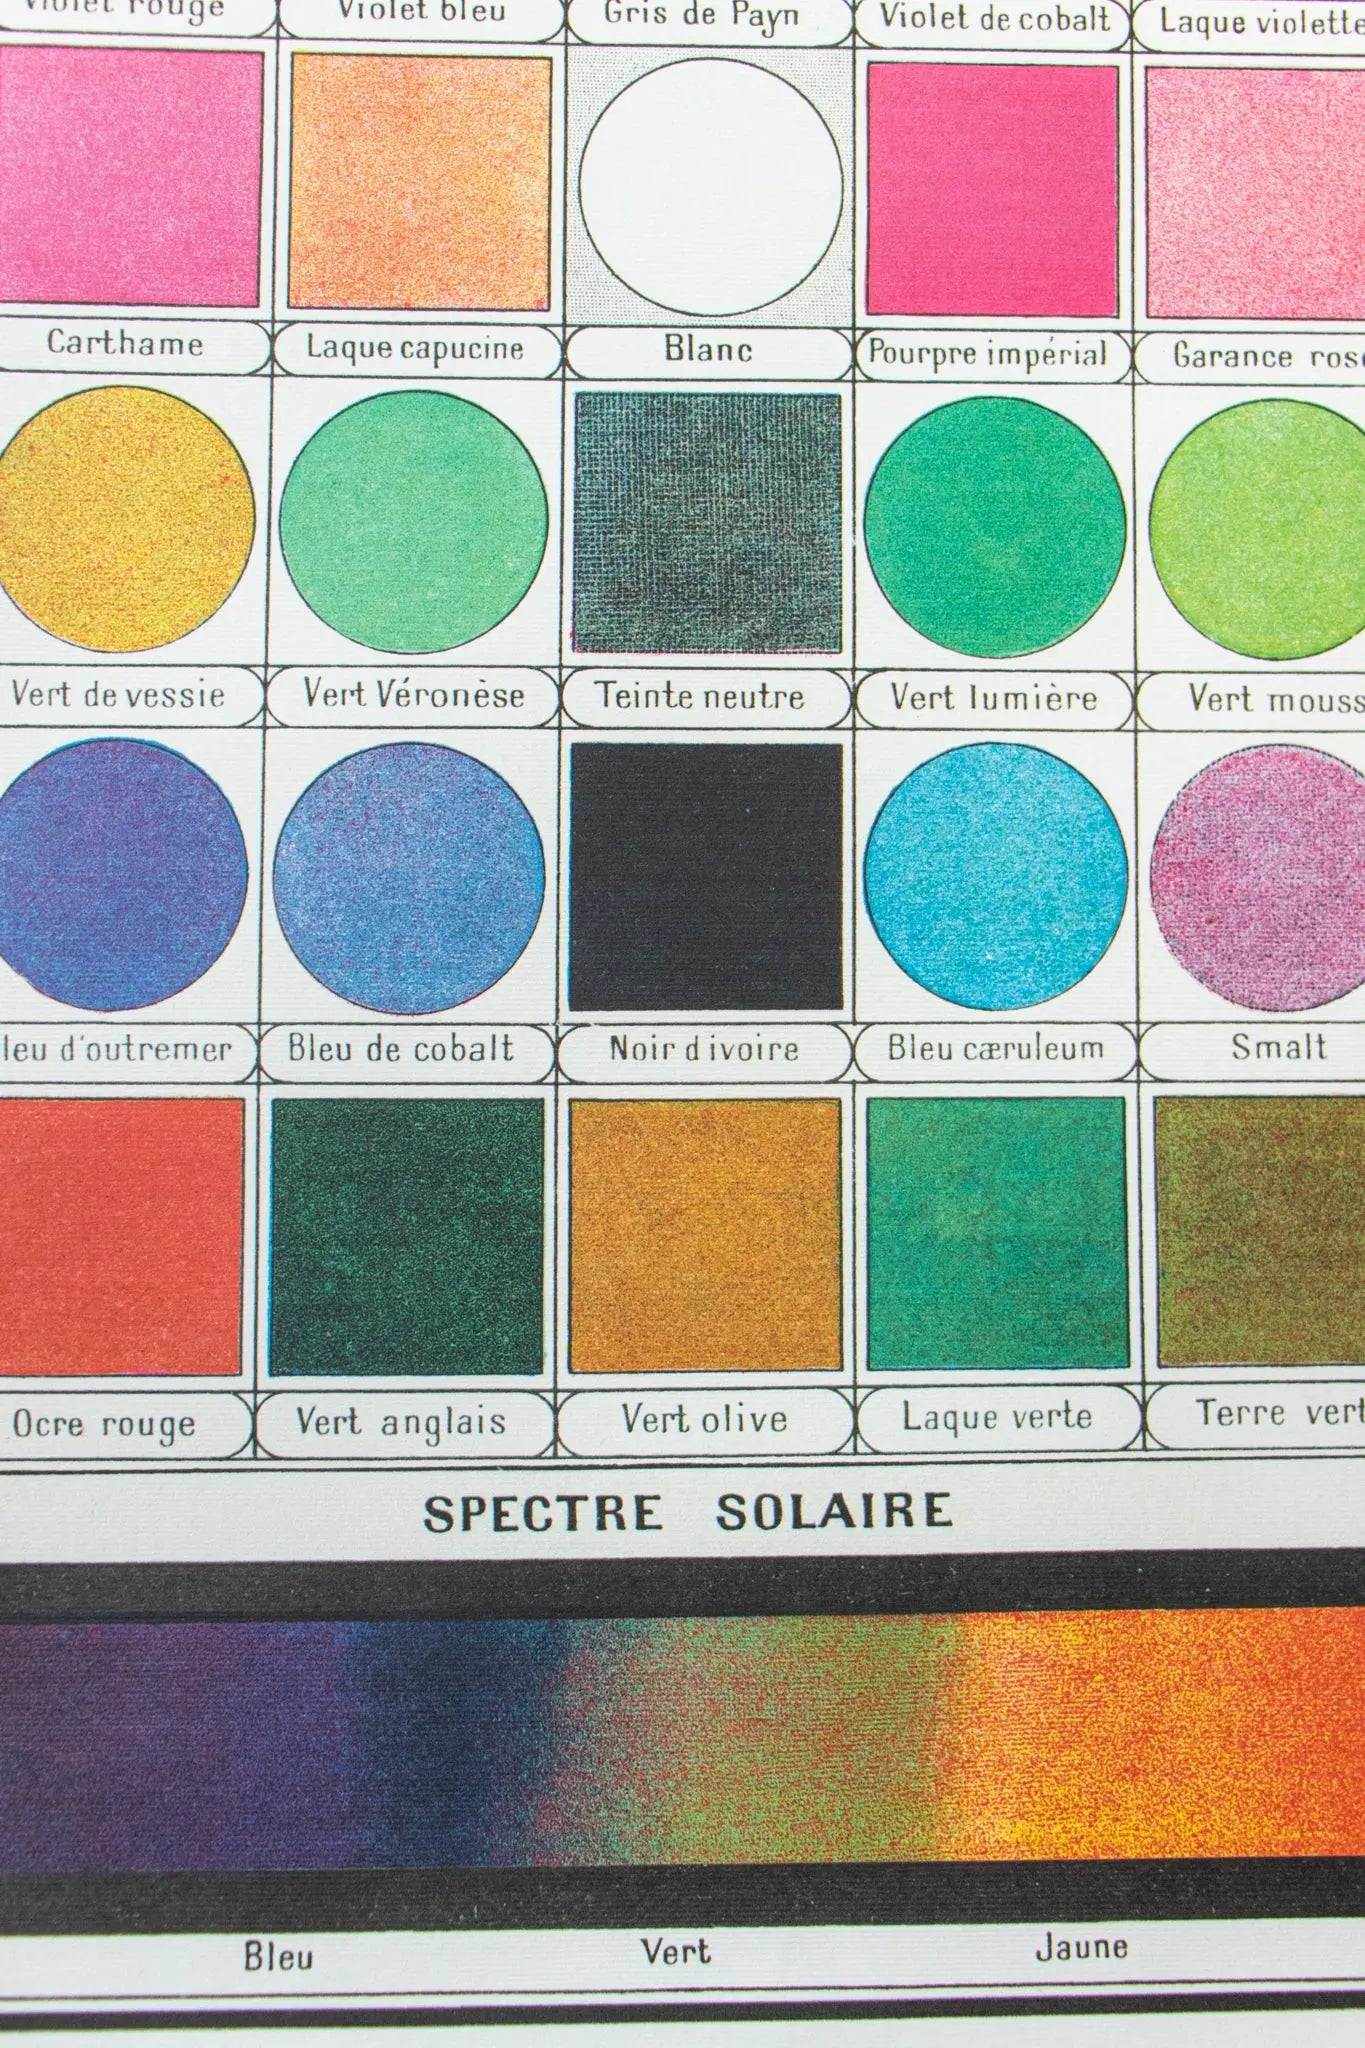 Color Table Chart - Stemcell Science Shop